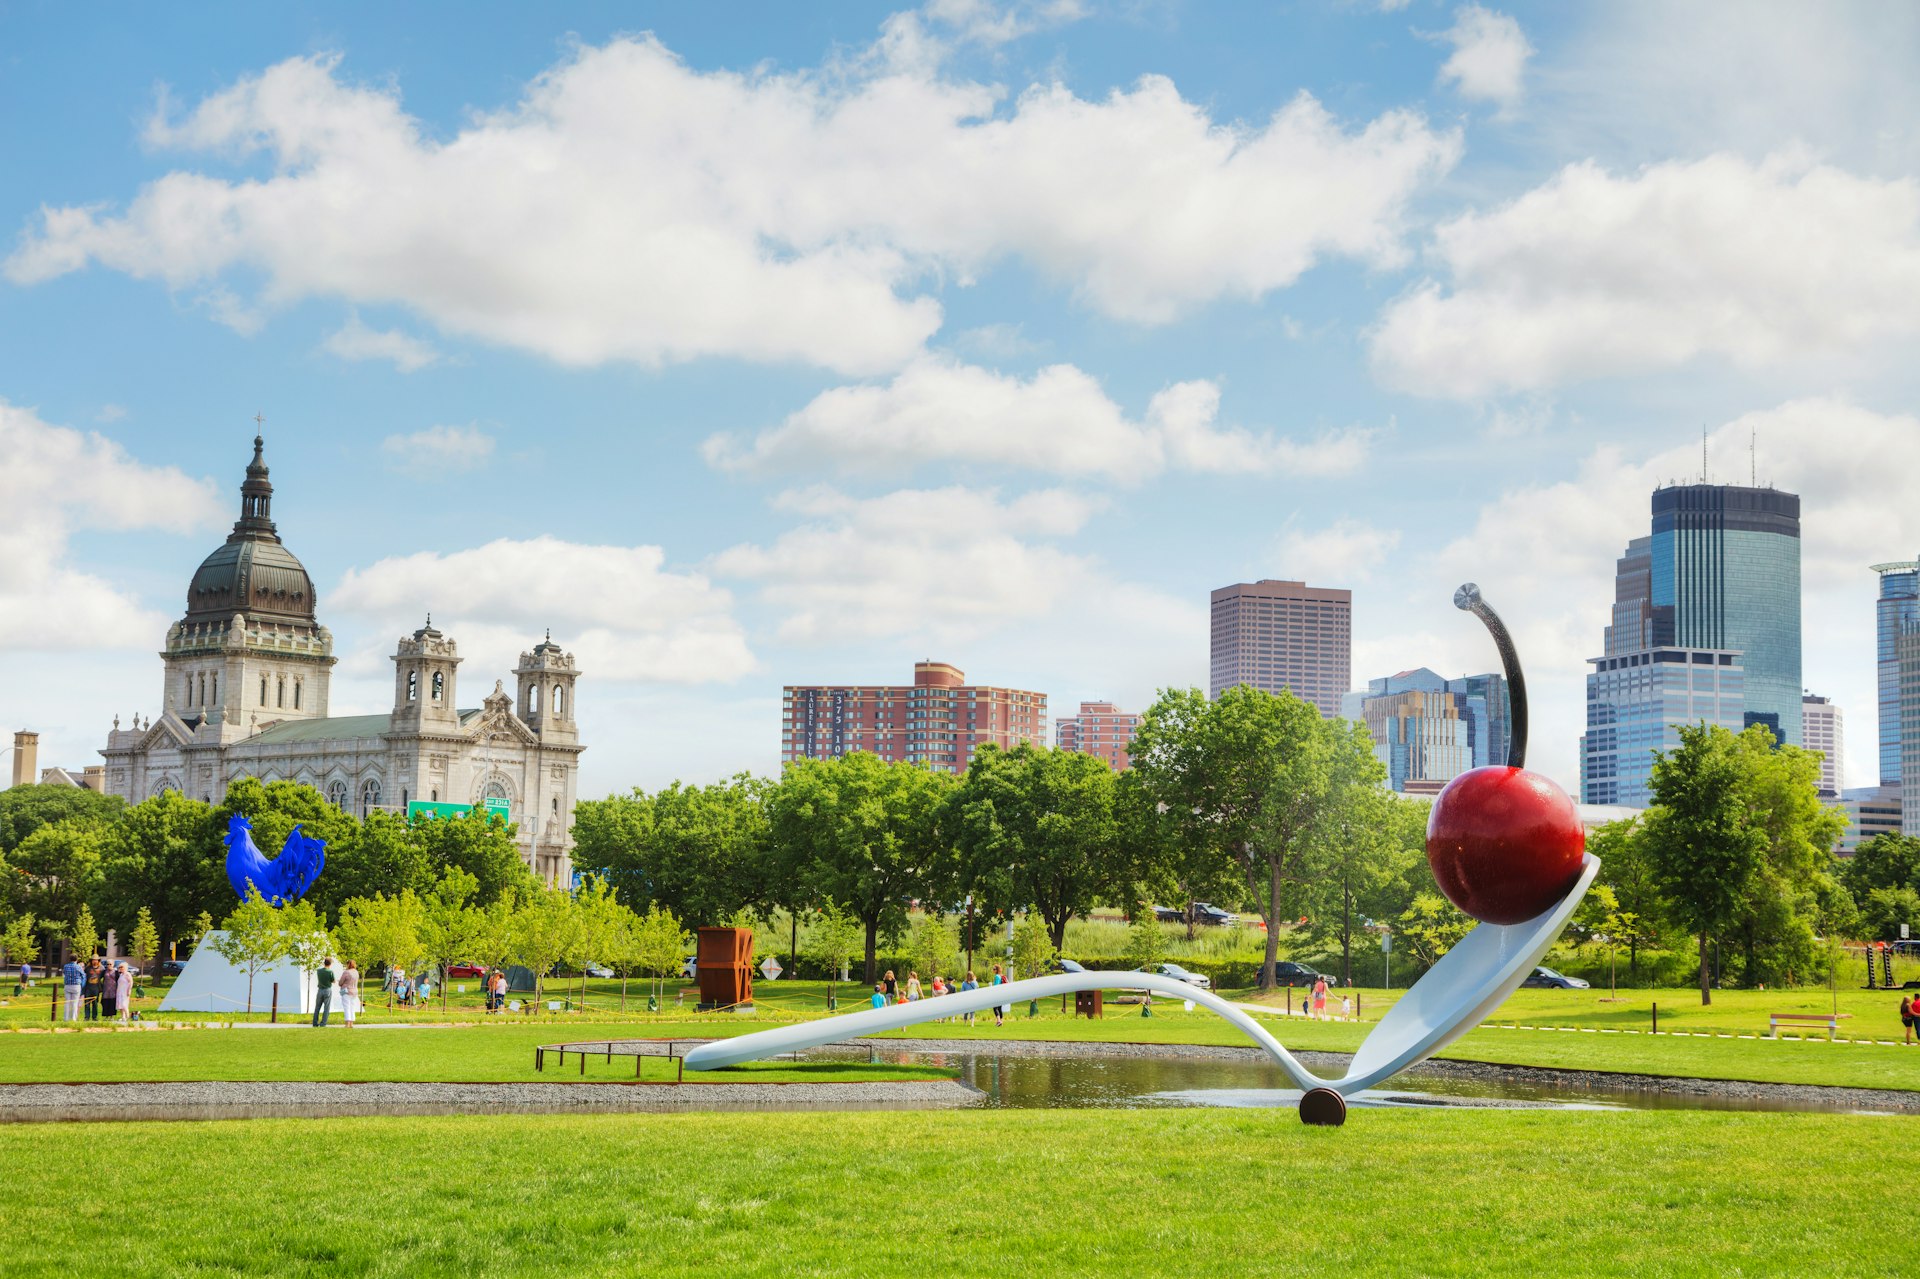 Famous Spoonbridge and Cherry sculpture in the Minneapolis Sculpture Garden in Minneapolis, Minnesota